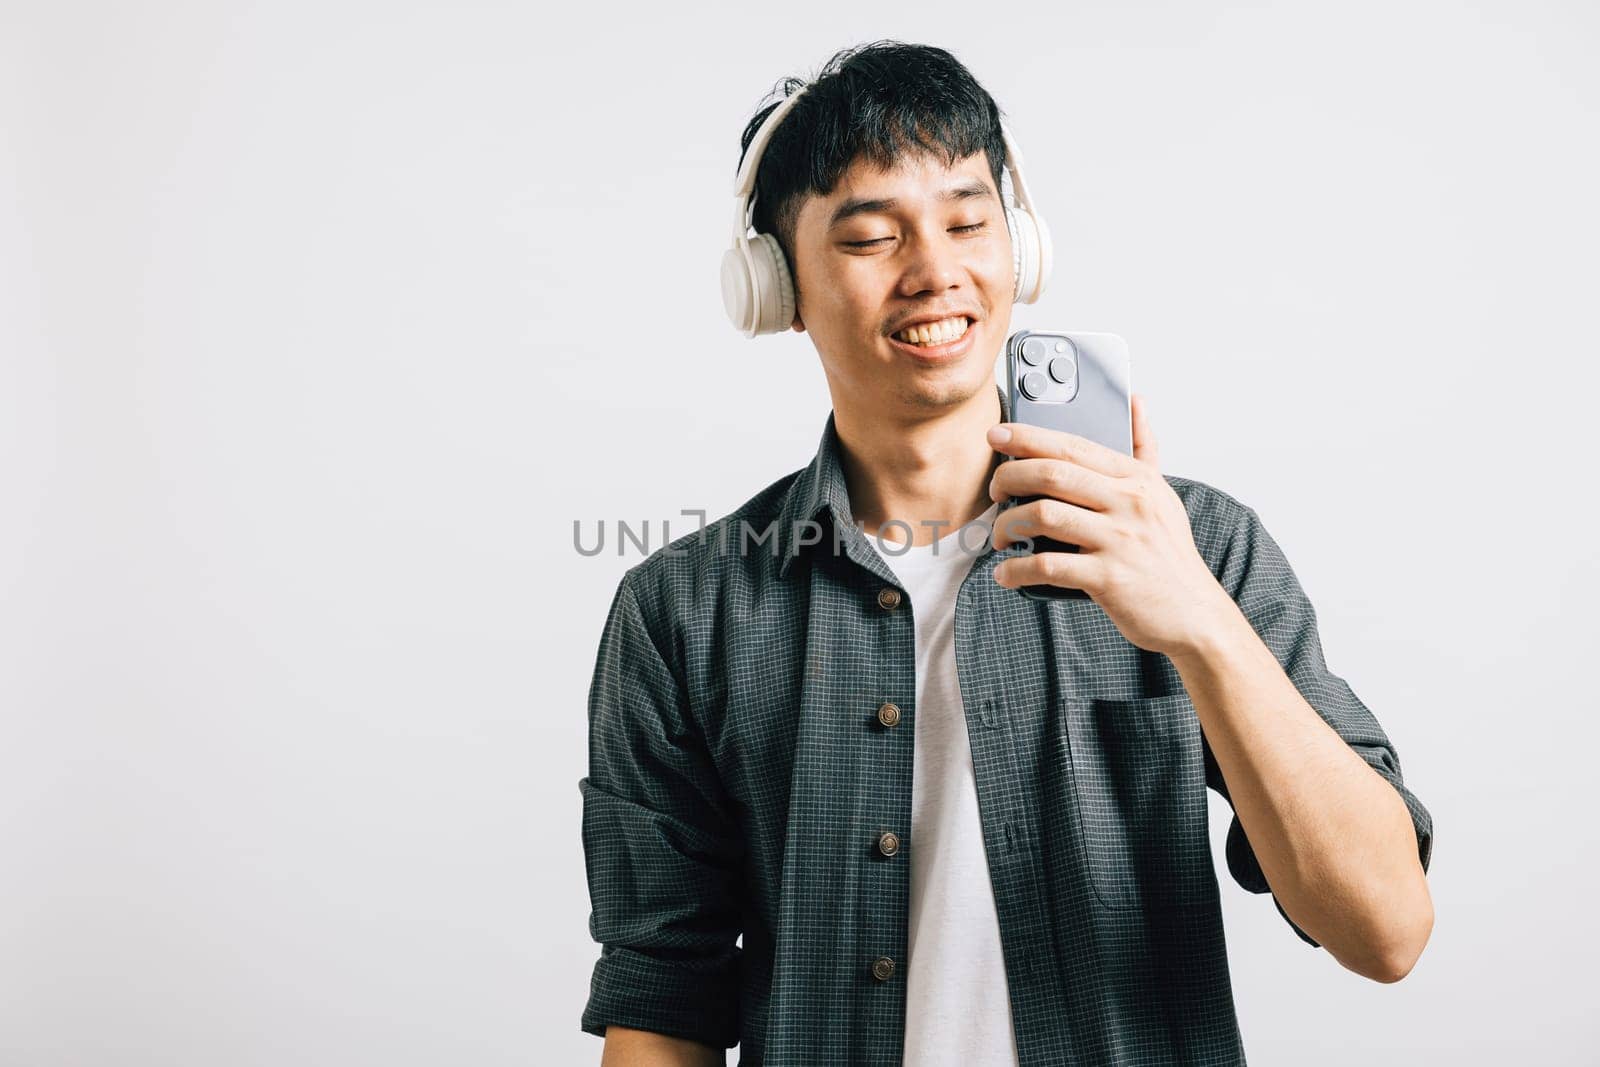 A man's happy karaoke moment unfolds as he listens to music on his smartphone by Sorapop